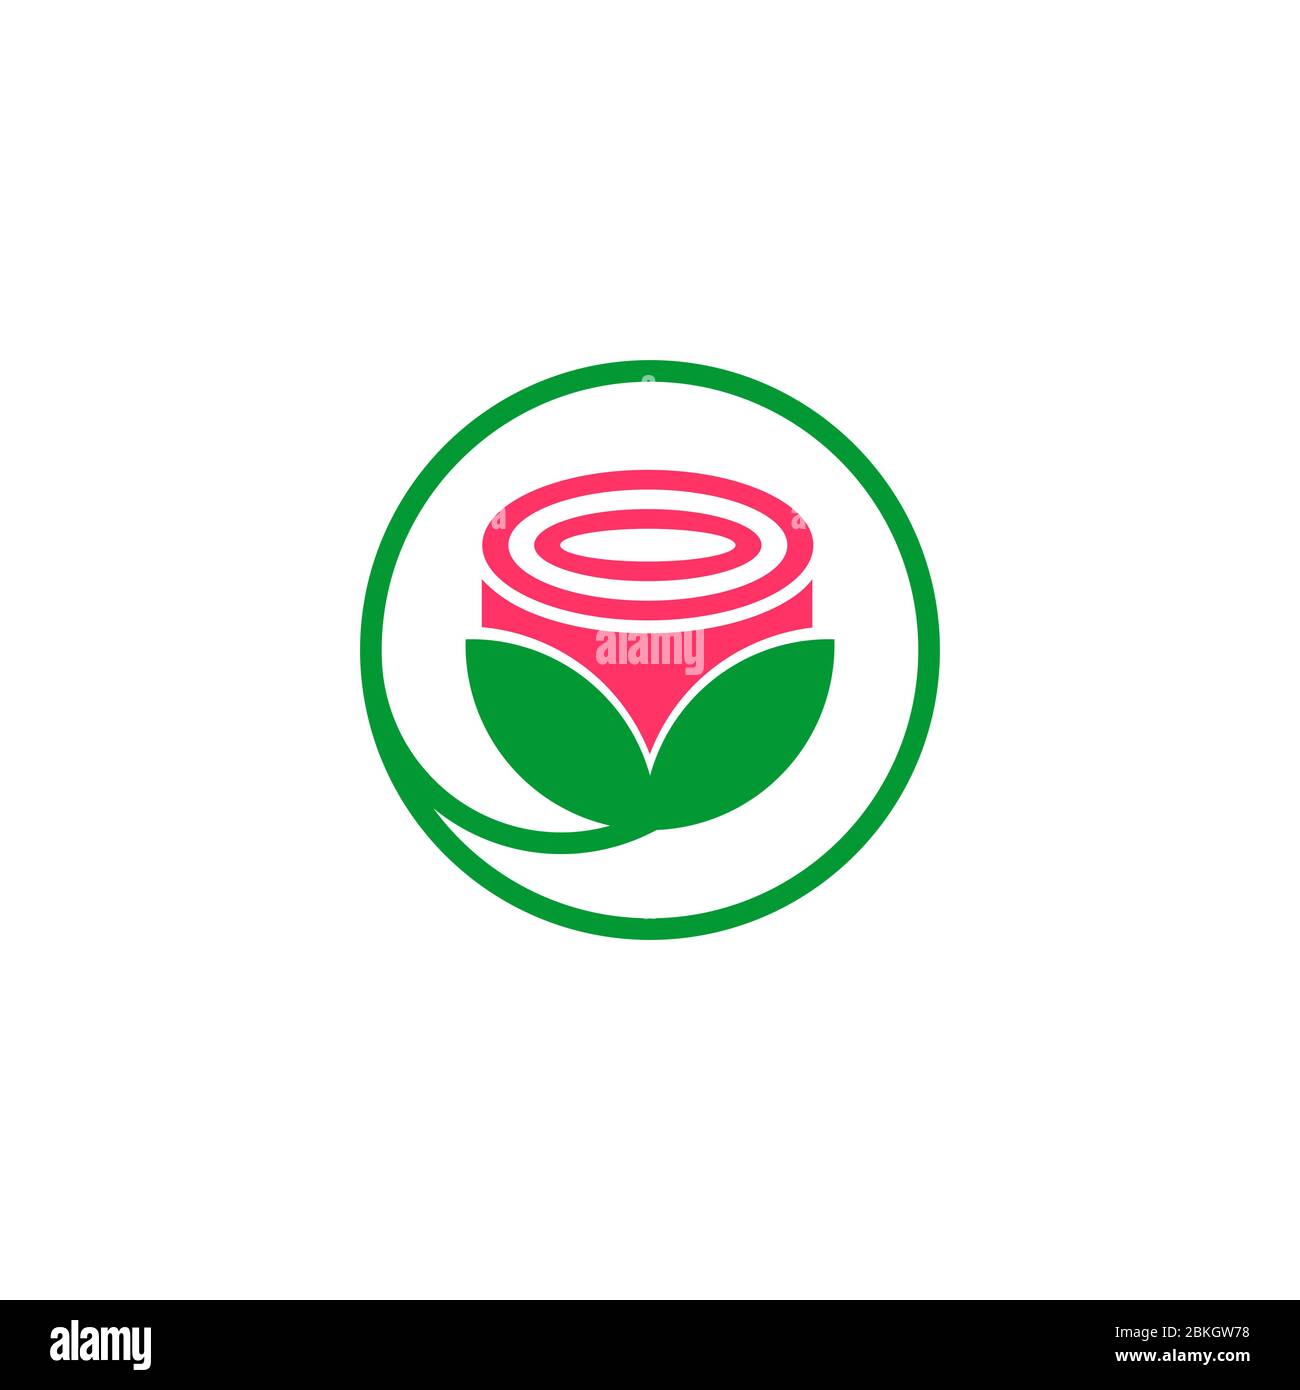 Rose flower graphic design concept template, isolated on white background. Stock Vector